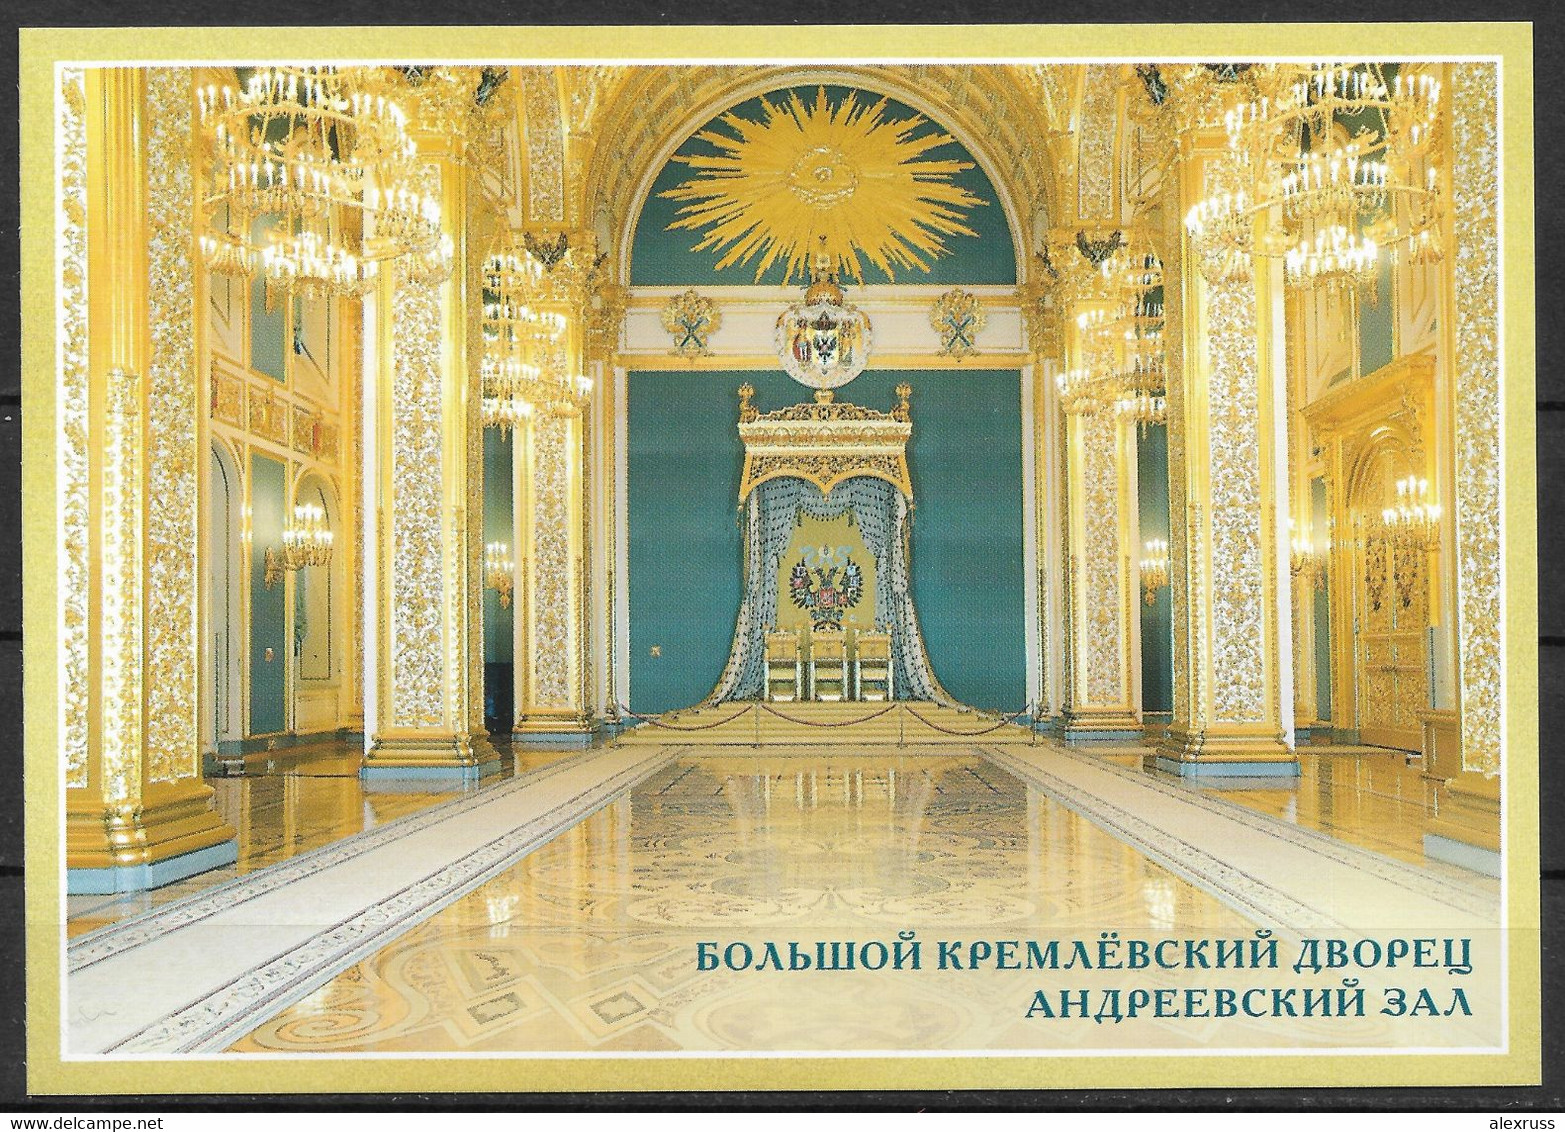 Postcard Russia 2019, Moscow Kremlin, Palace Interior, Hall Of St. Andrew, XF NEW ! - Ungebraucht